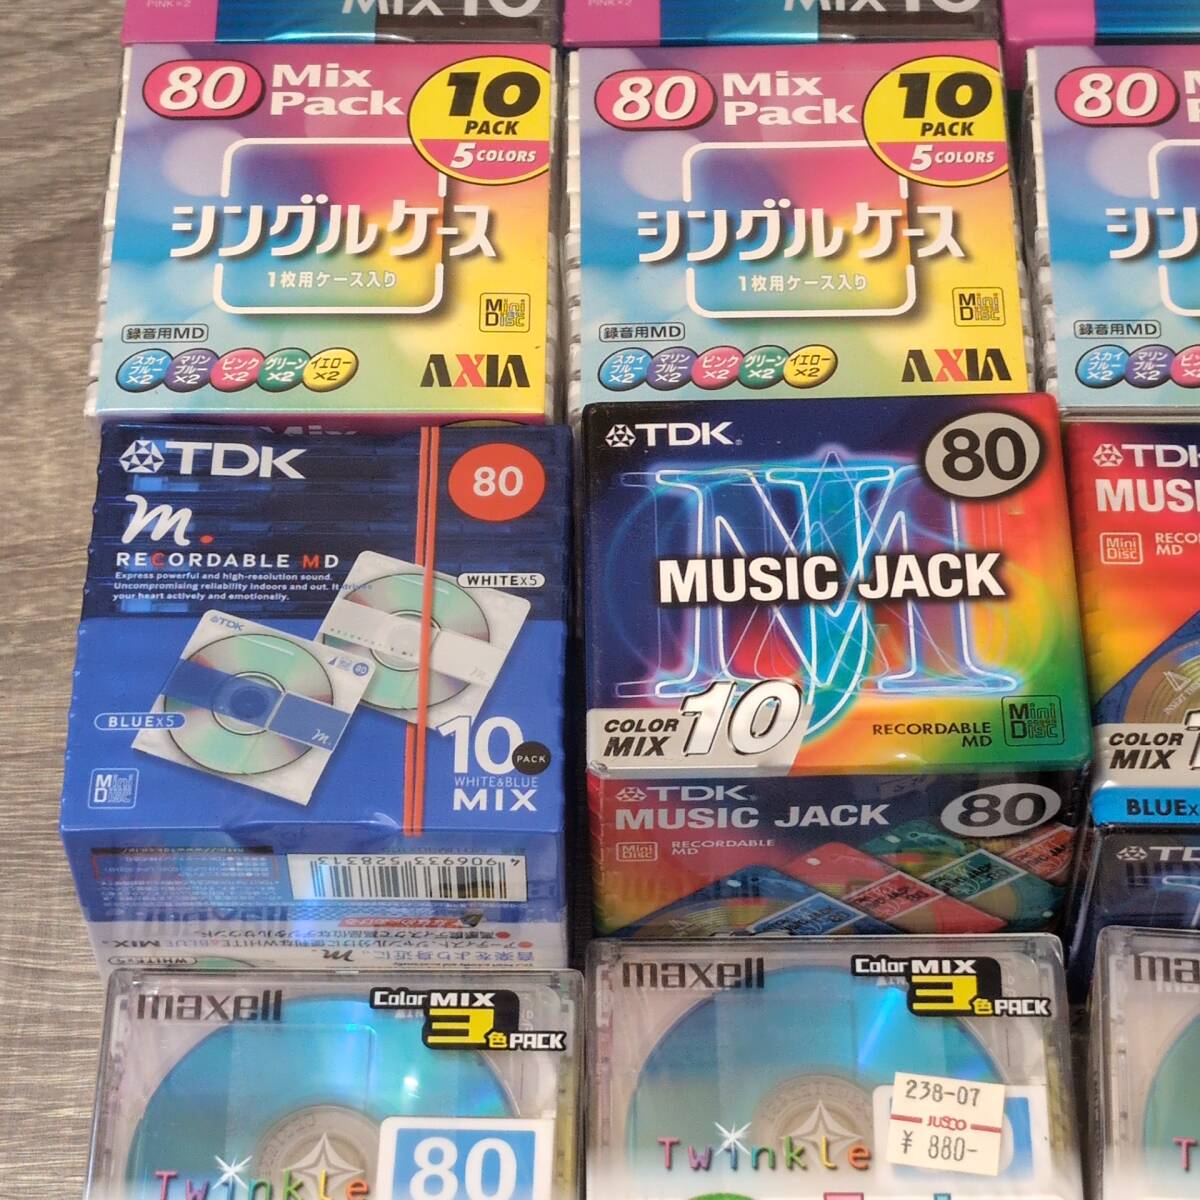 【MD】 大量 150枚以上セット 沢山 まとめ メディア 記憶媒体 記録 TDK Victor AXIA maxell 超貴重 希少 color mix シングル スリム レアの画像4